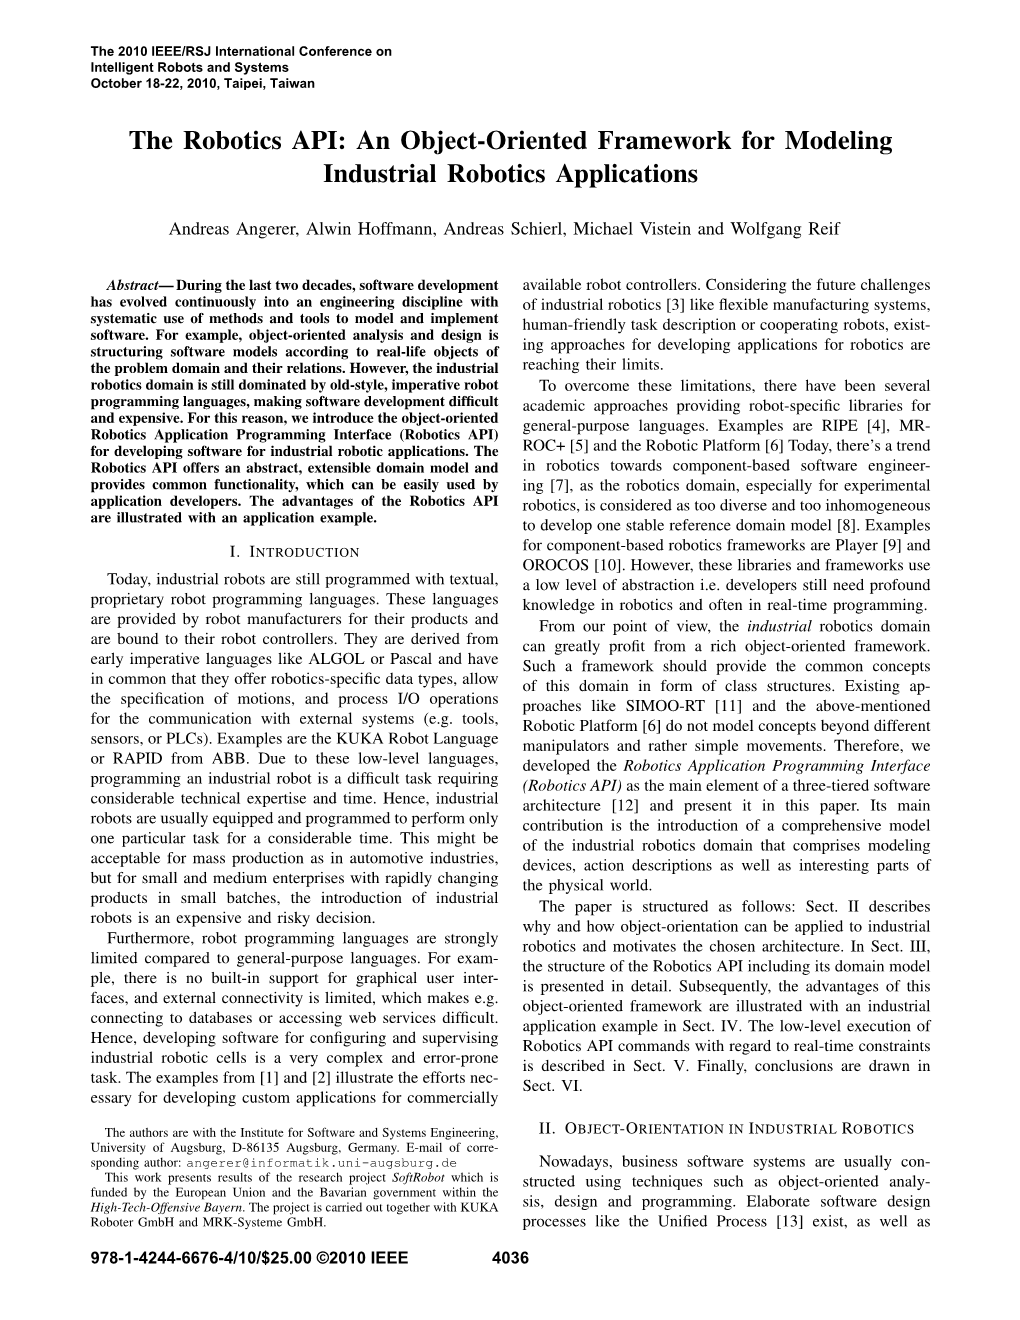 The Robotics API: an Object-Oriented Framework for Modeling Industrial Robotics Applications